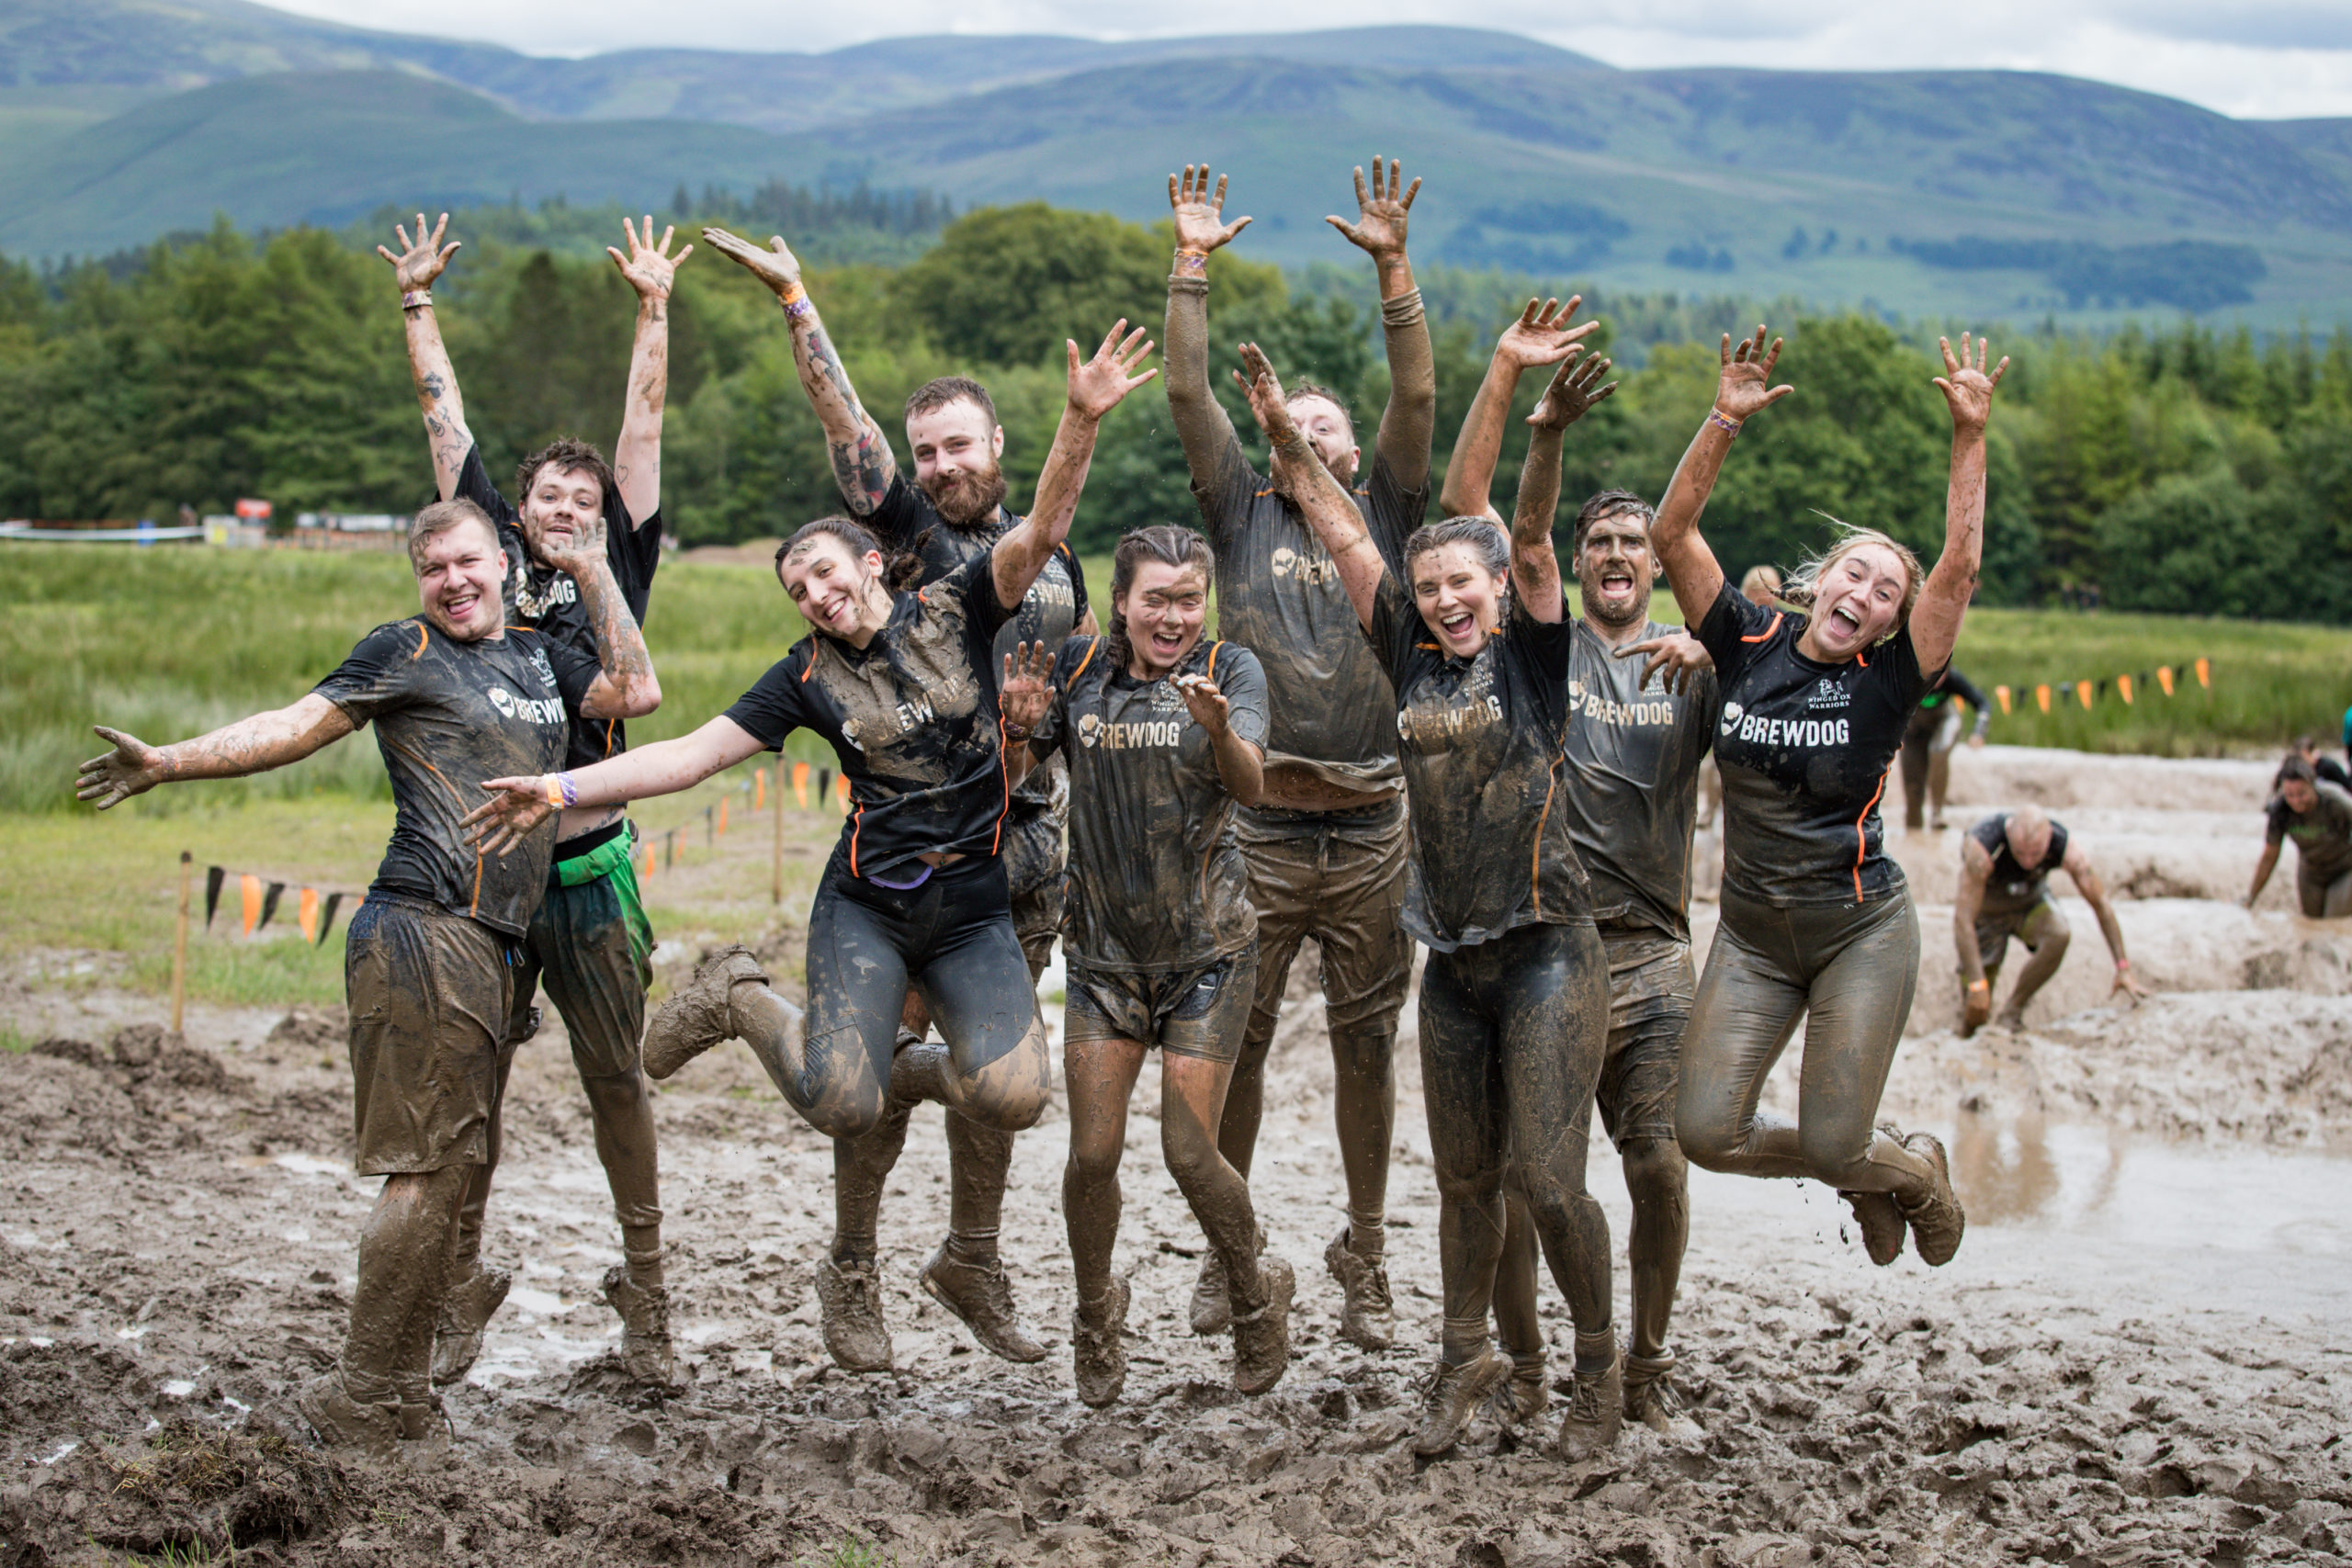 Tough Mudder UK The World's Best Mud Run and Obstacle Course